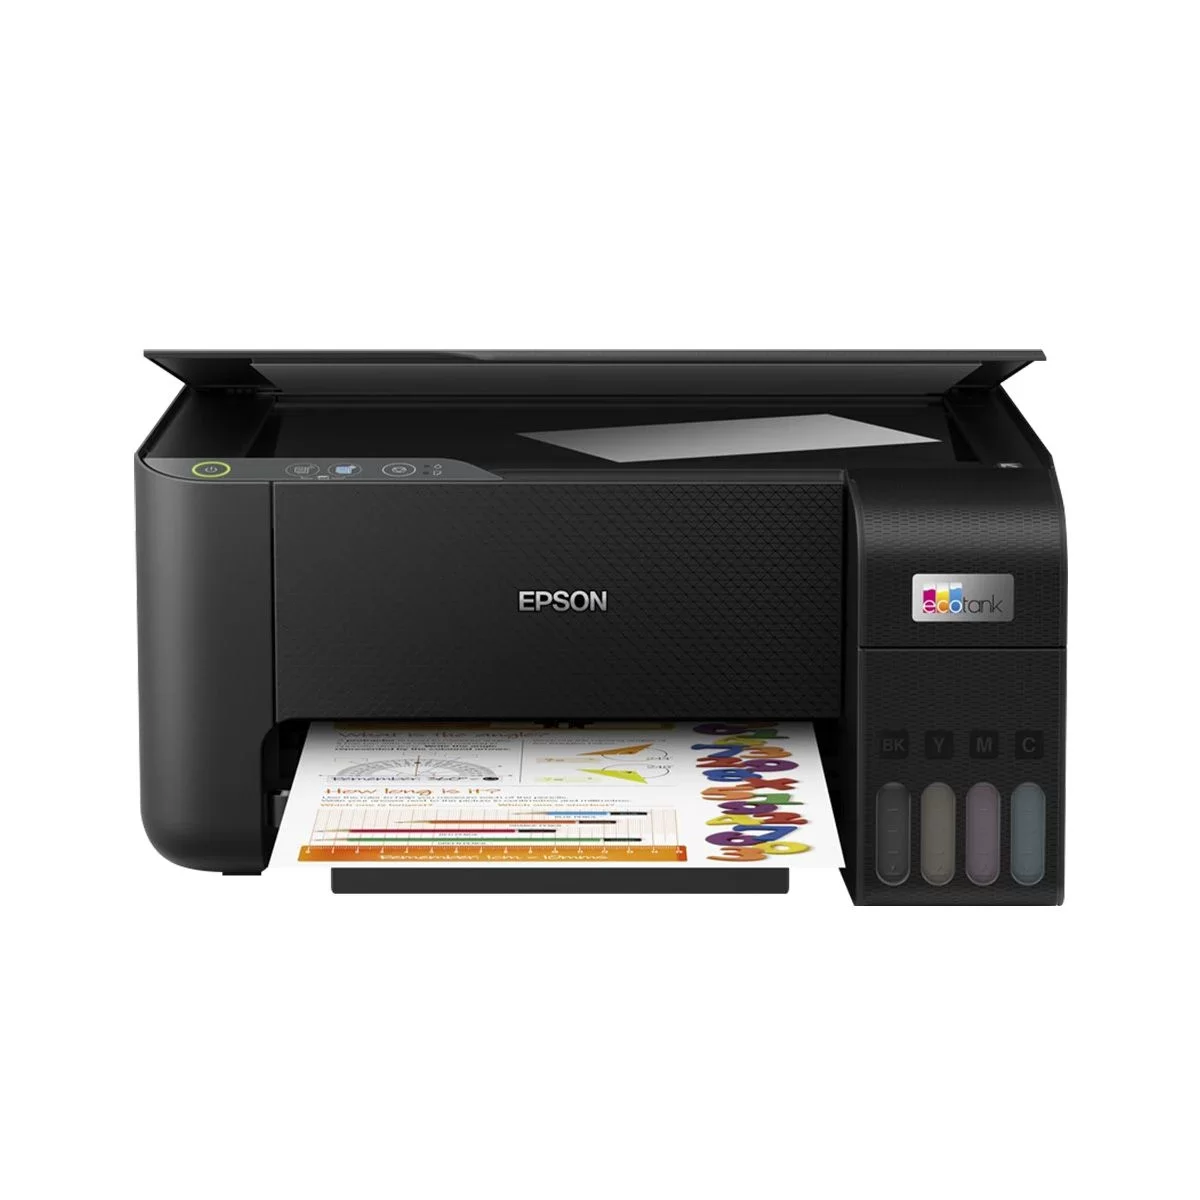 EPSON ECOTANK L3210 A4 ALL-IN-ONE